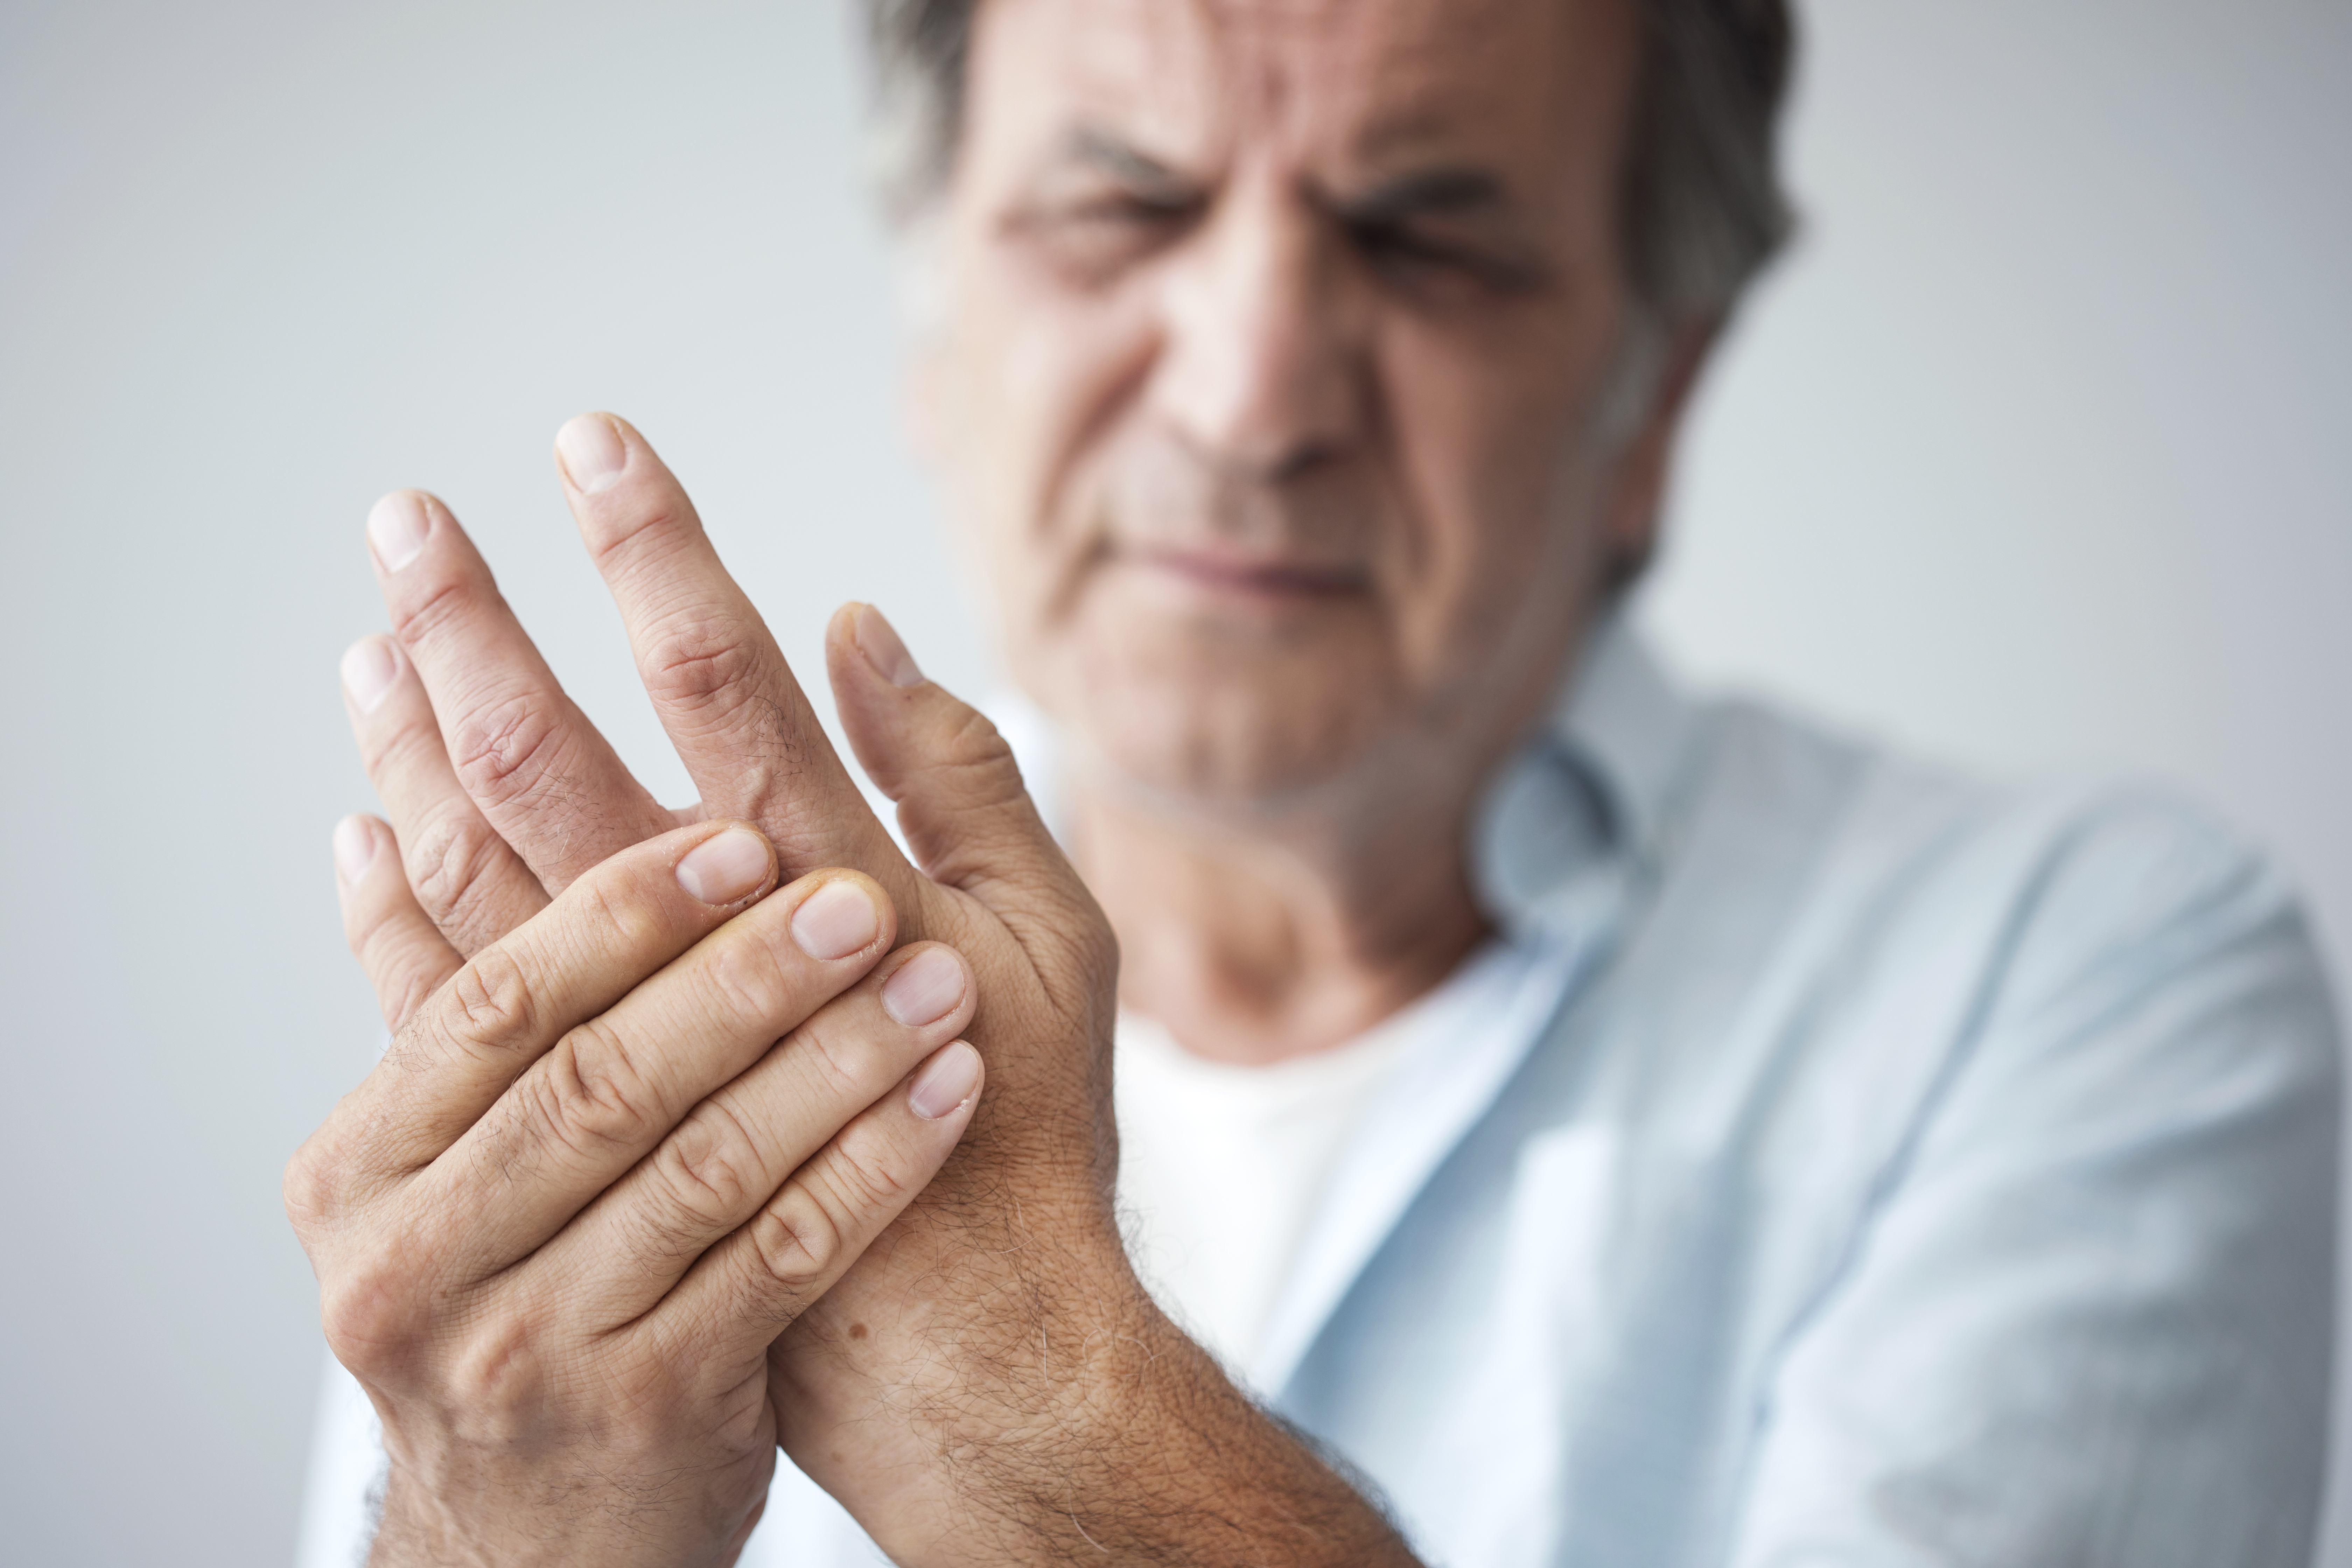 An older man cringing and holding his hand in pain from arthritis